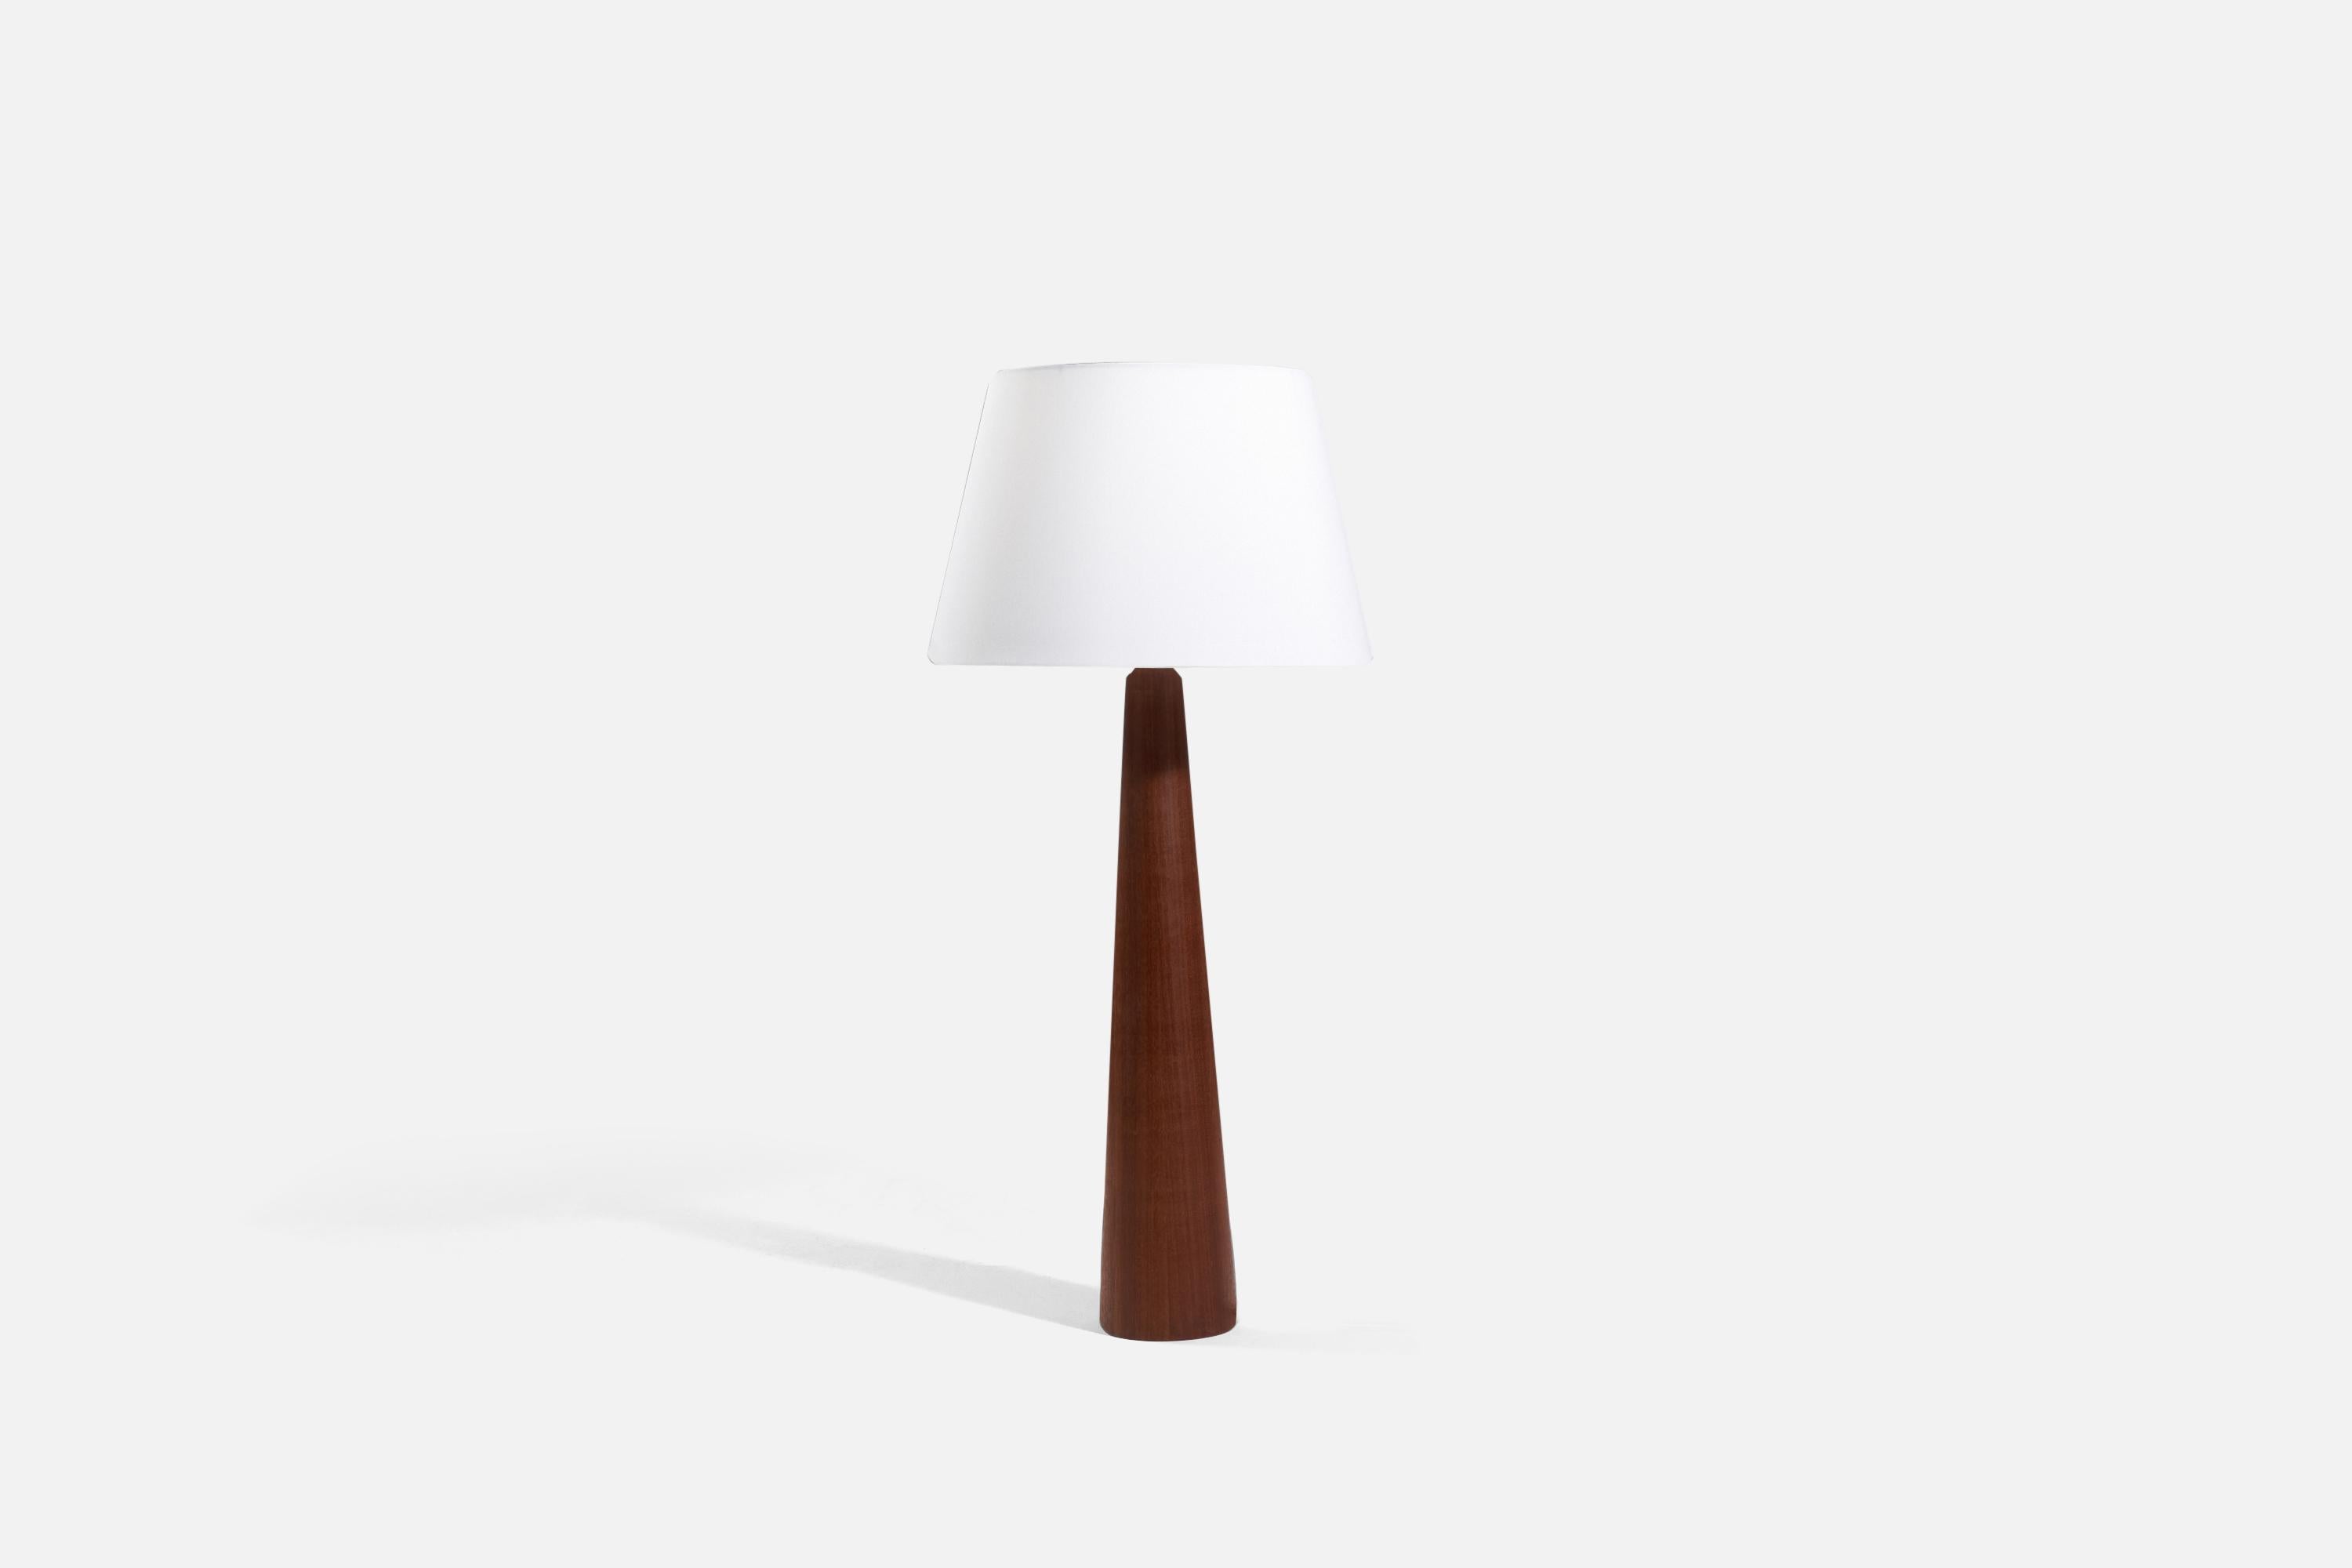 A wood table lamp or floor lamp designed and produced by a Swedish designer, Sweden, c.1960s.

Sold without lampshade. 
Dimensions of lamp (inches) : 35.125 x 5.625 x 5.625 (H x W x D).
Dimensions shade (inches) : 13 x 18 x 11.875 (T x B x